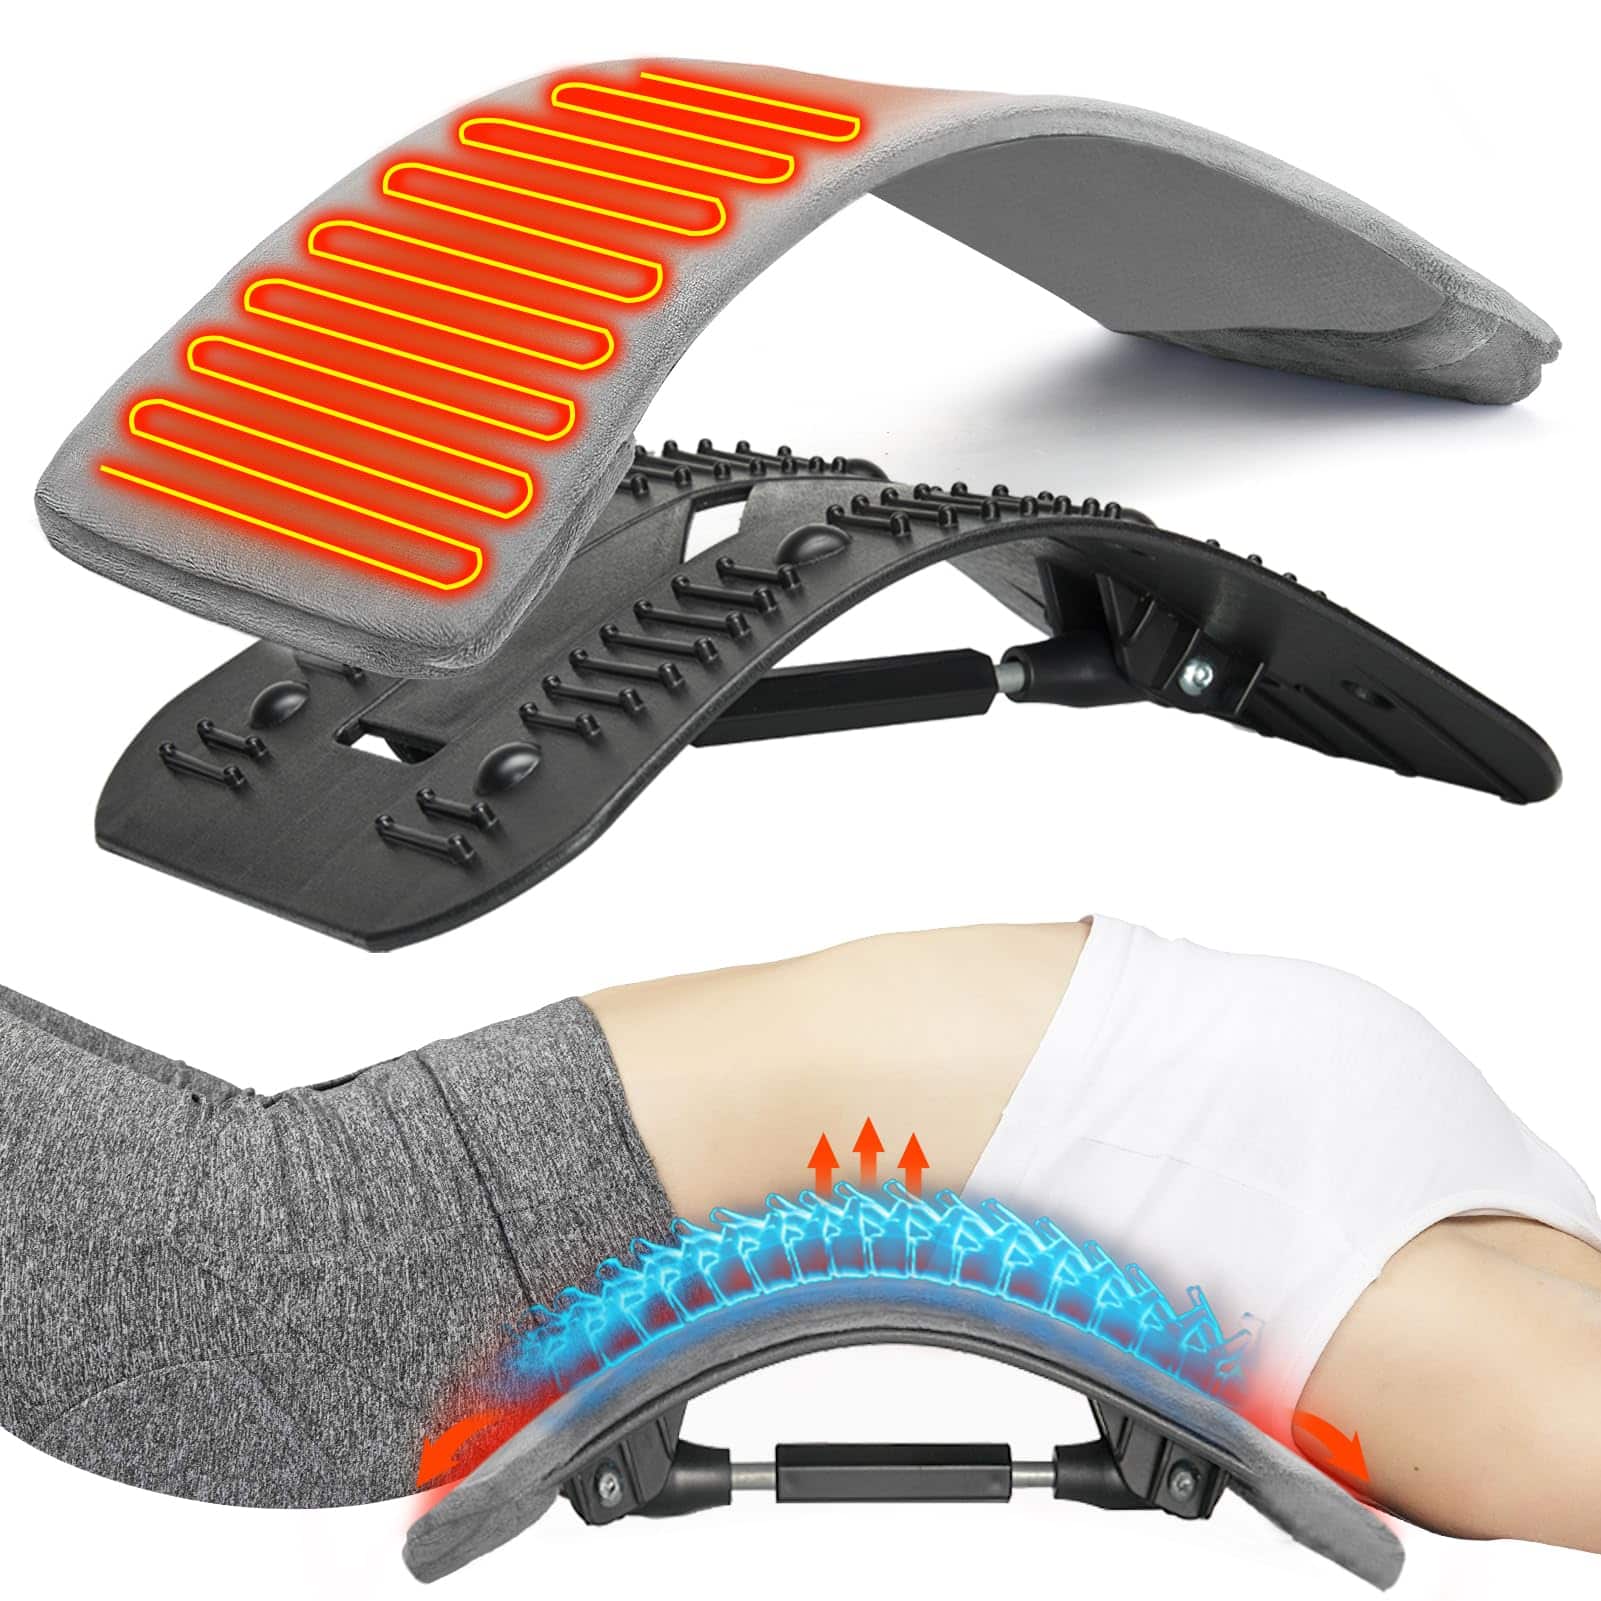 Top Best Gadgets For Muscle Spine Pain Relief: Back Stretcher With Detachable Heating Pad - Healthsoothe